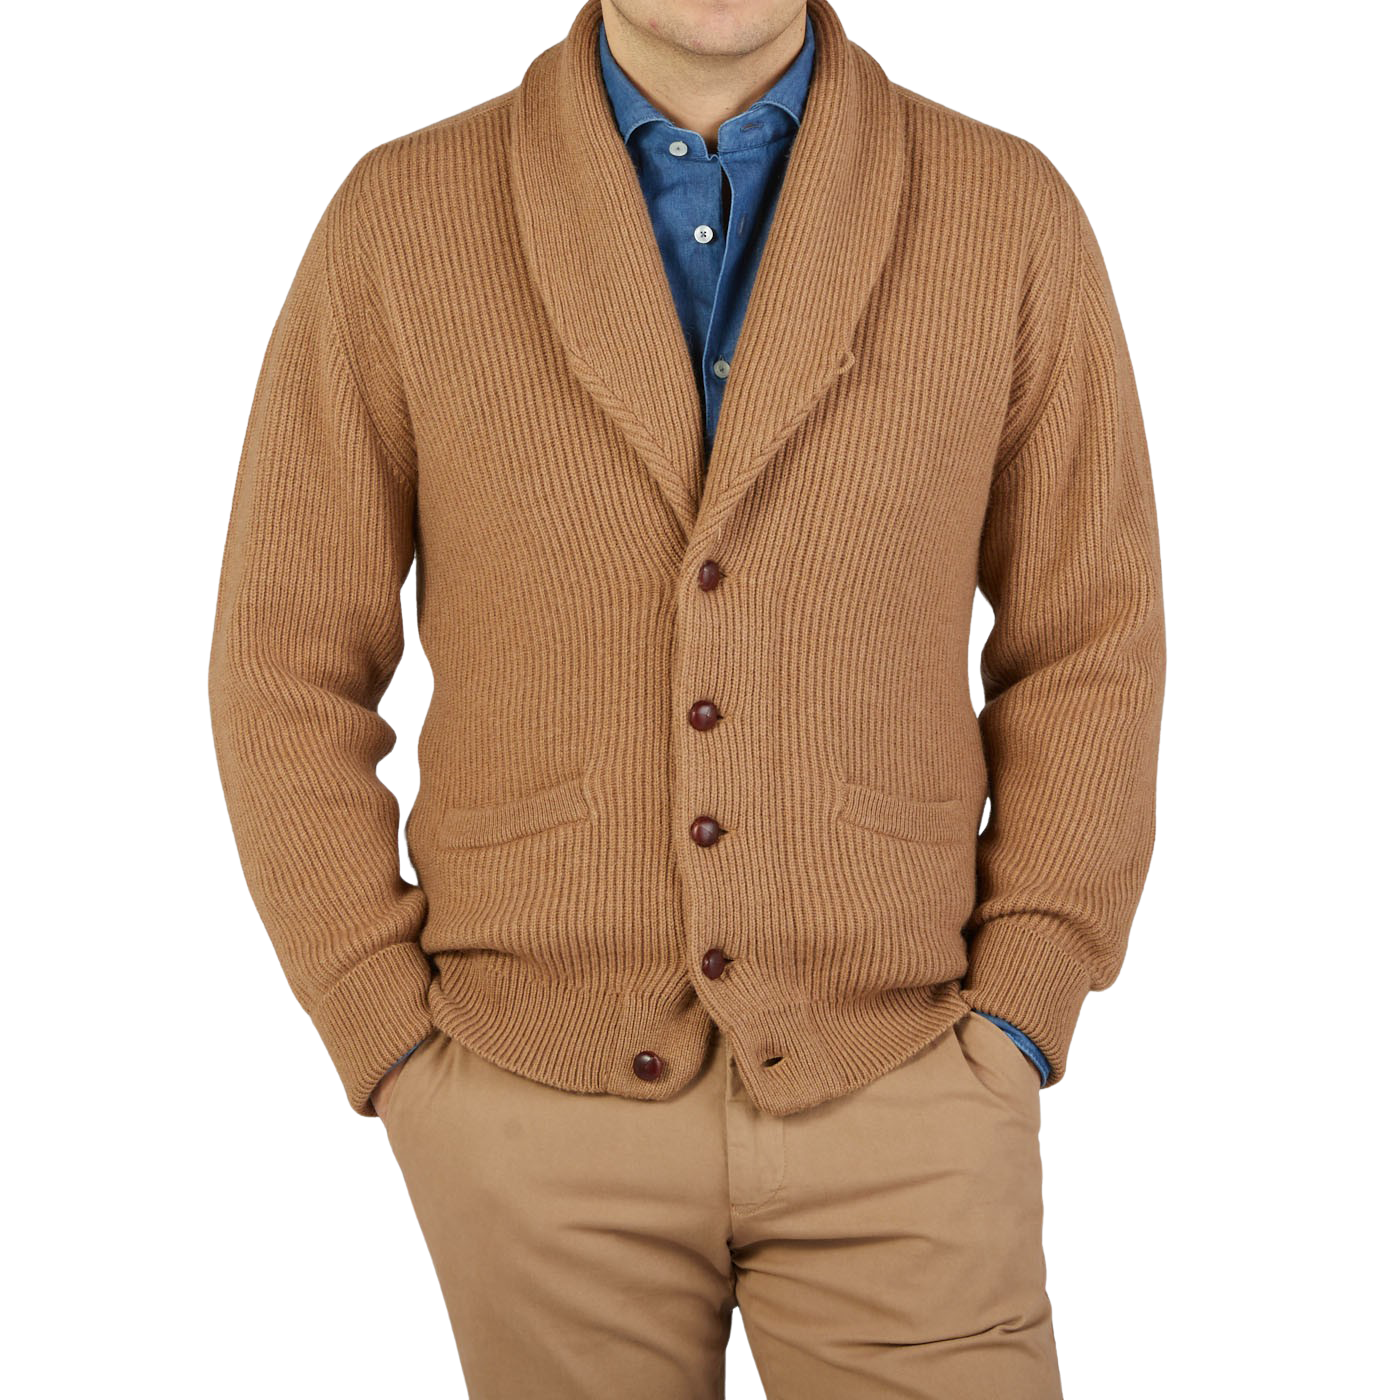 A man wearing a William Lockie Brown Camel Hair Shawl Collar Cardigan made of pure camel hair.